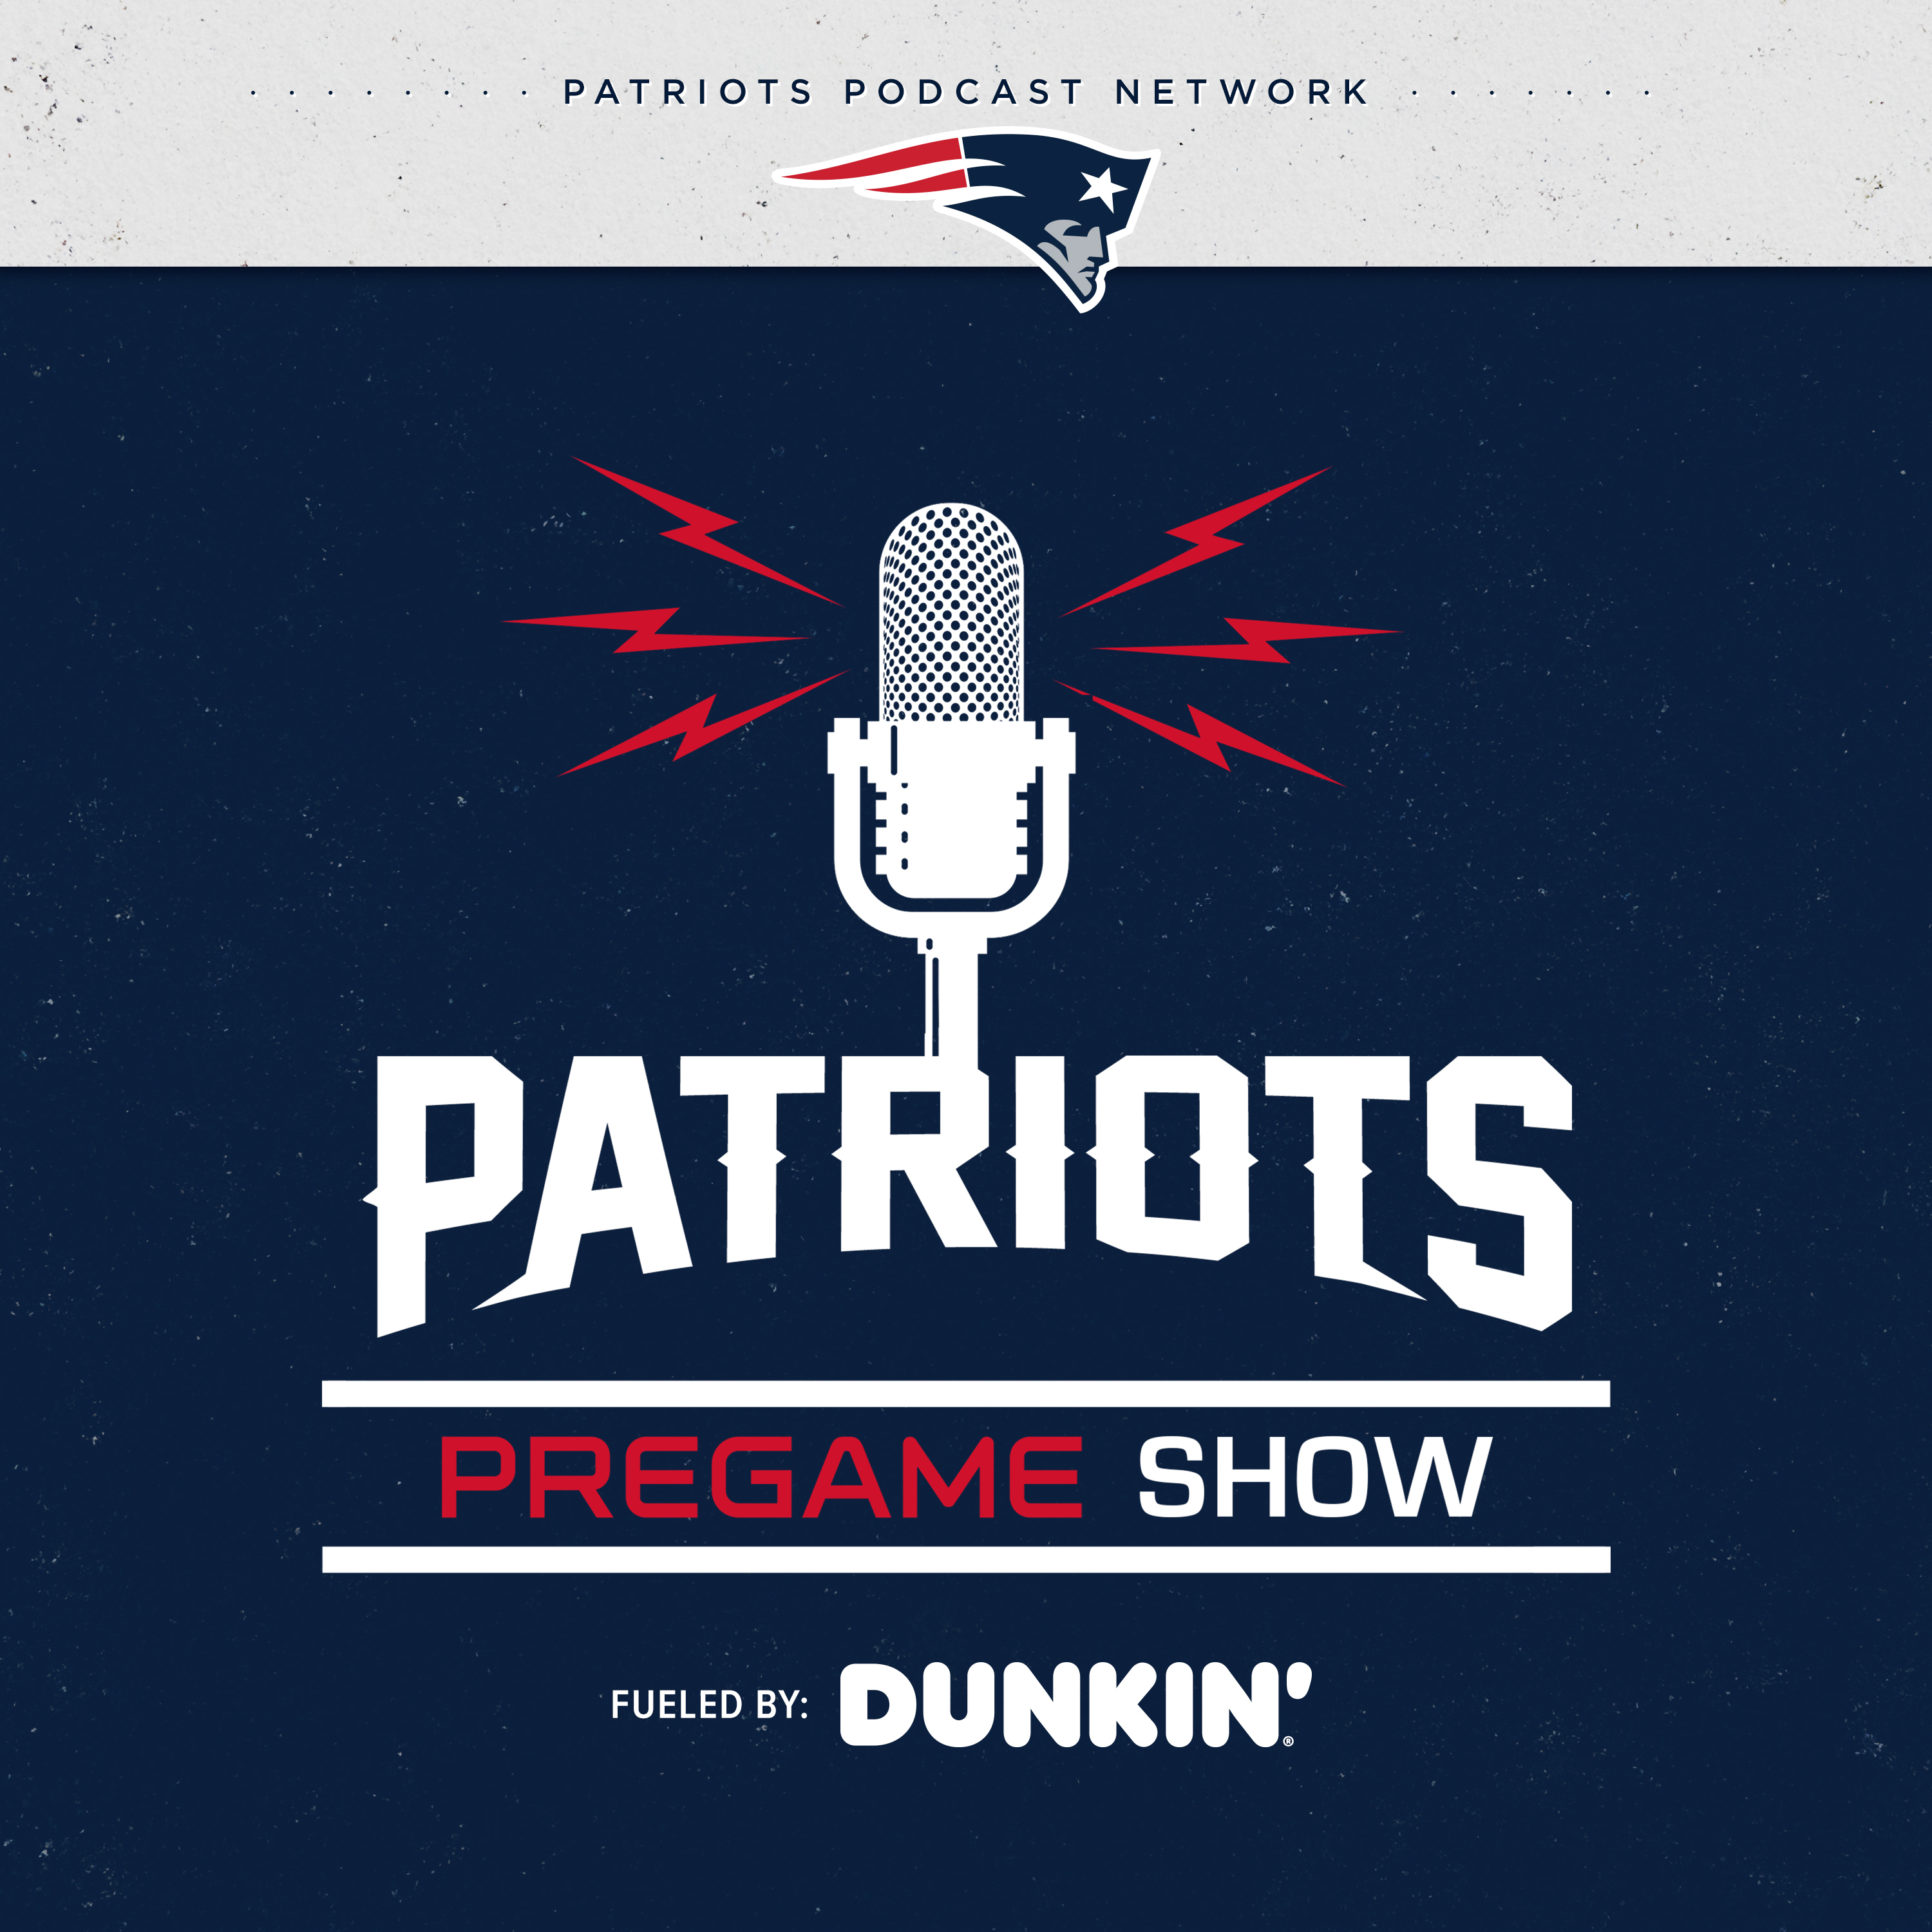 Patriots Pregame Show 12/7: Previewing the Steelers, Keys to the Game, Inactive Analysis